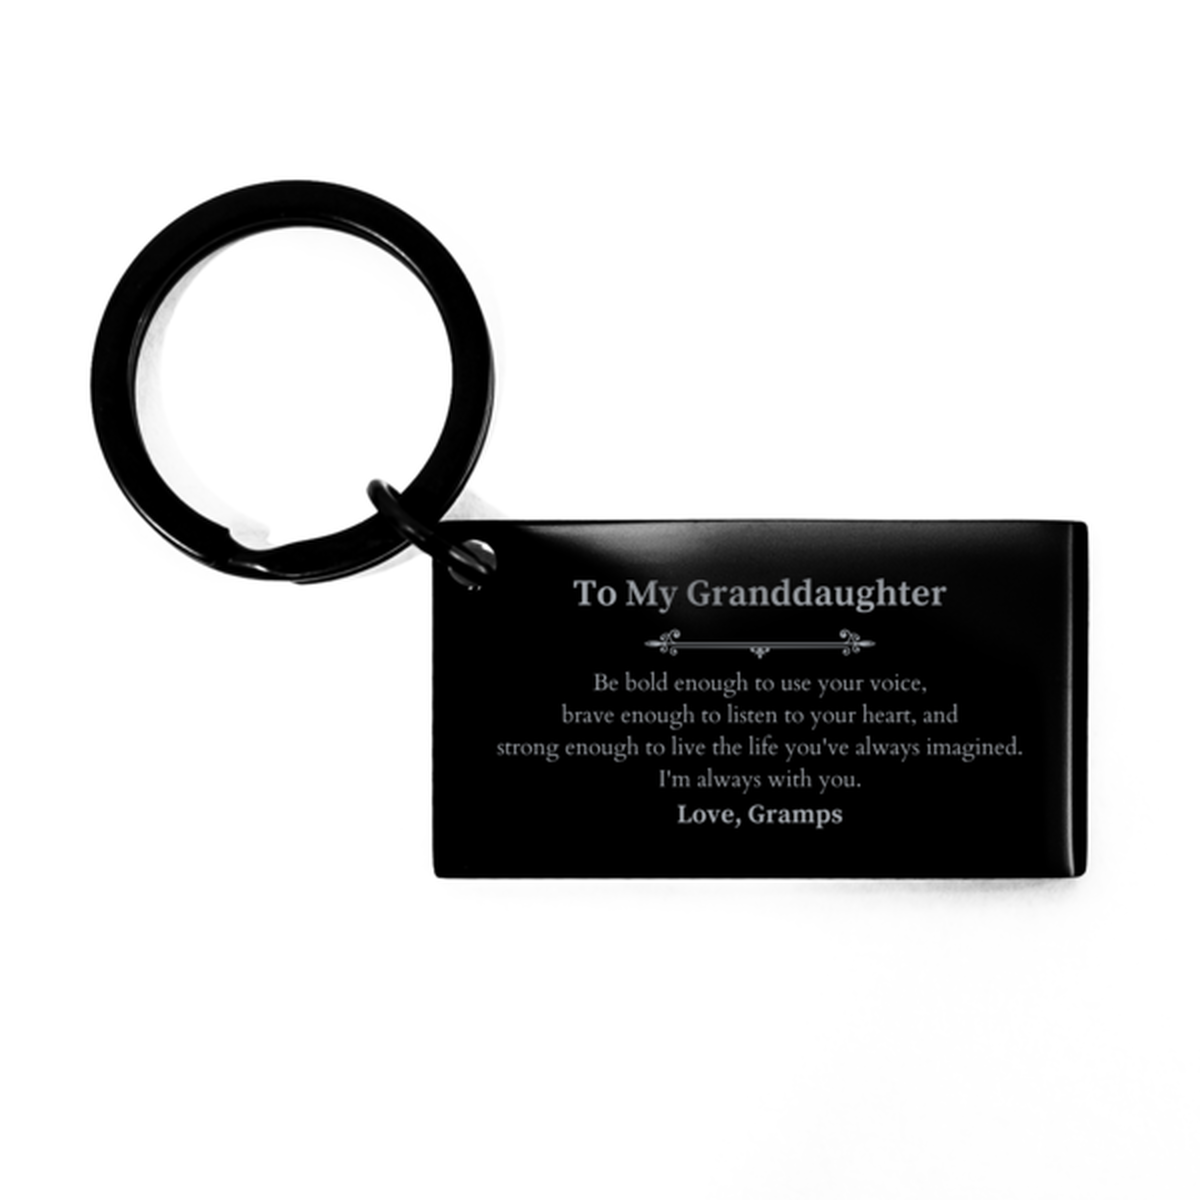 Keepsake Granddaughter Keychain Gift Idea Graduation Christmas Birthday Granddaughter from Gramps, Granddaughter Be bold enough to use your voice, brave enough to listen to your heart. Love, Gramps